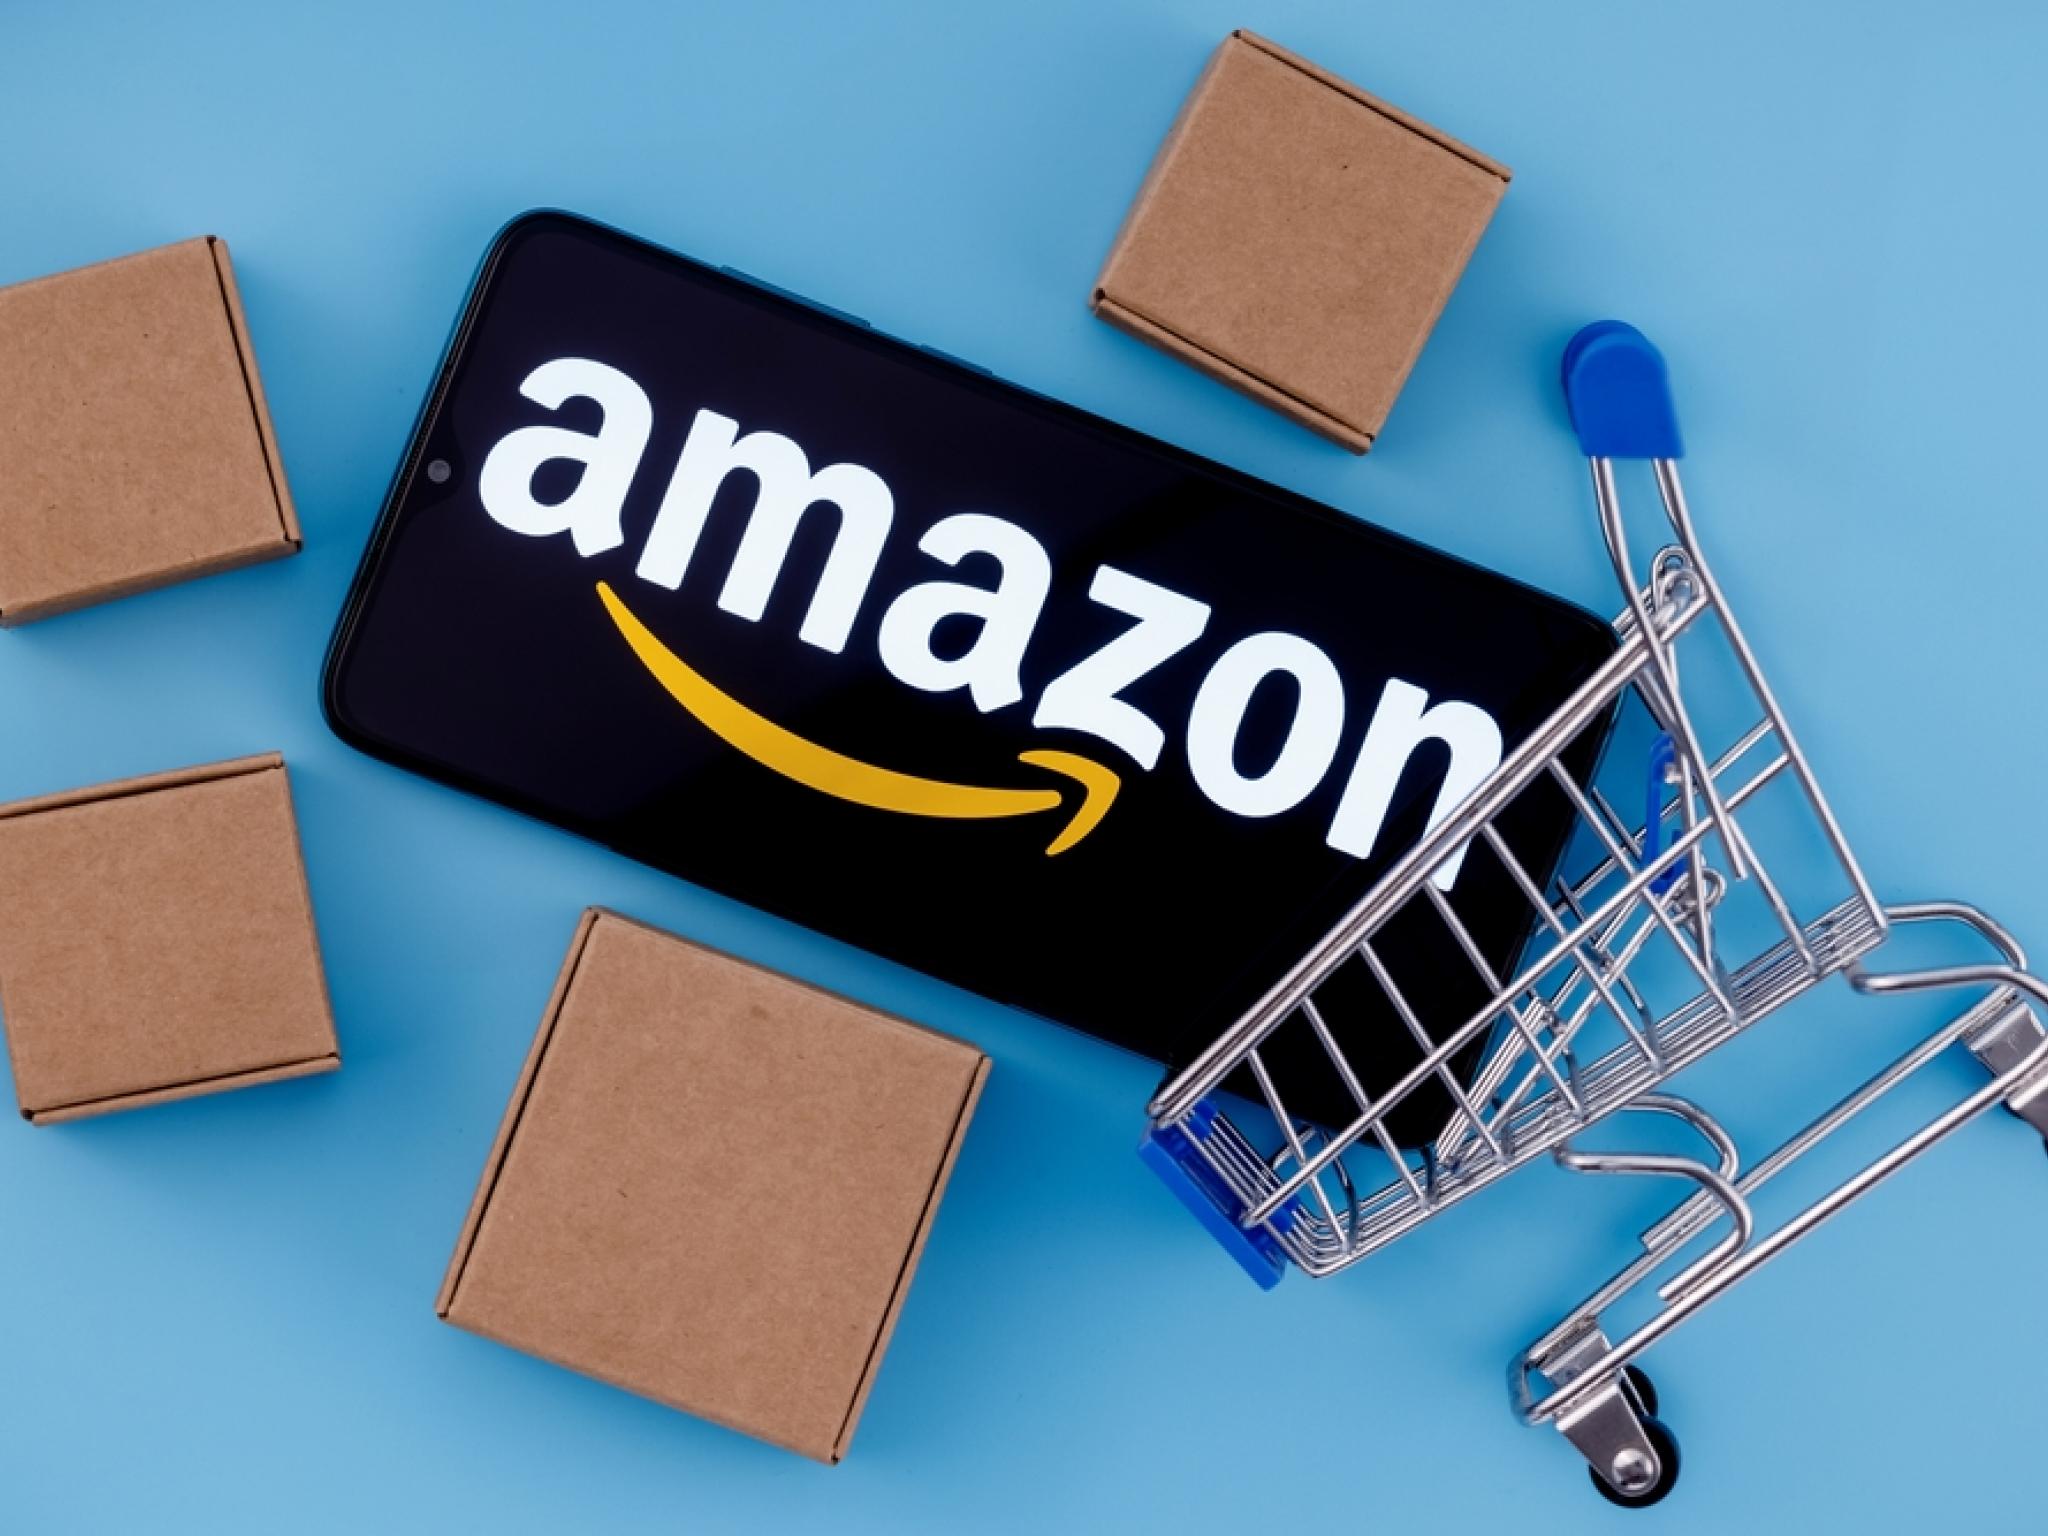  dow-jones-welcomes-amazon-today-but-analyst-raises-historical-caution-for-e-commerce-stock-should-investors-be-worried 